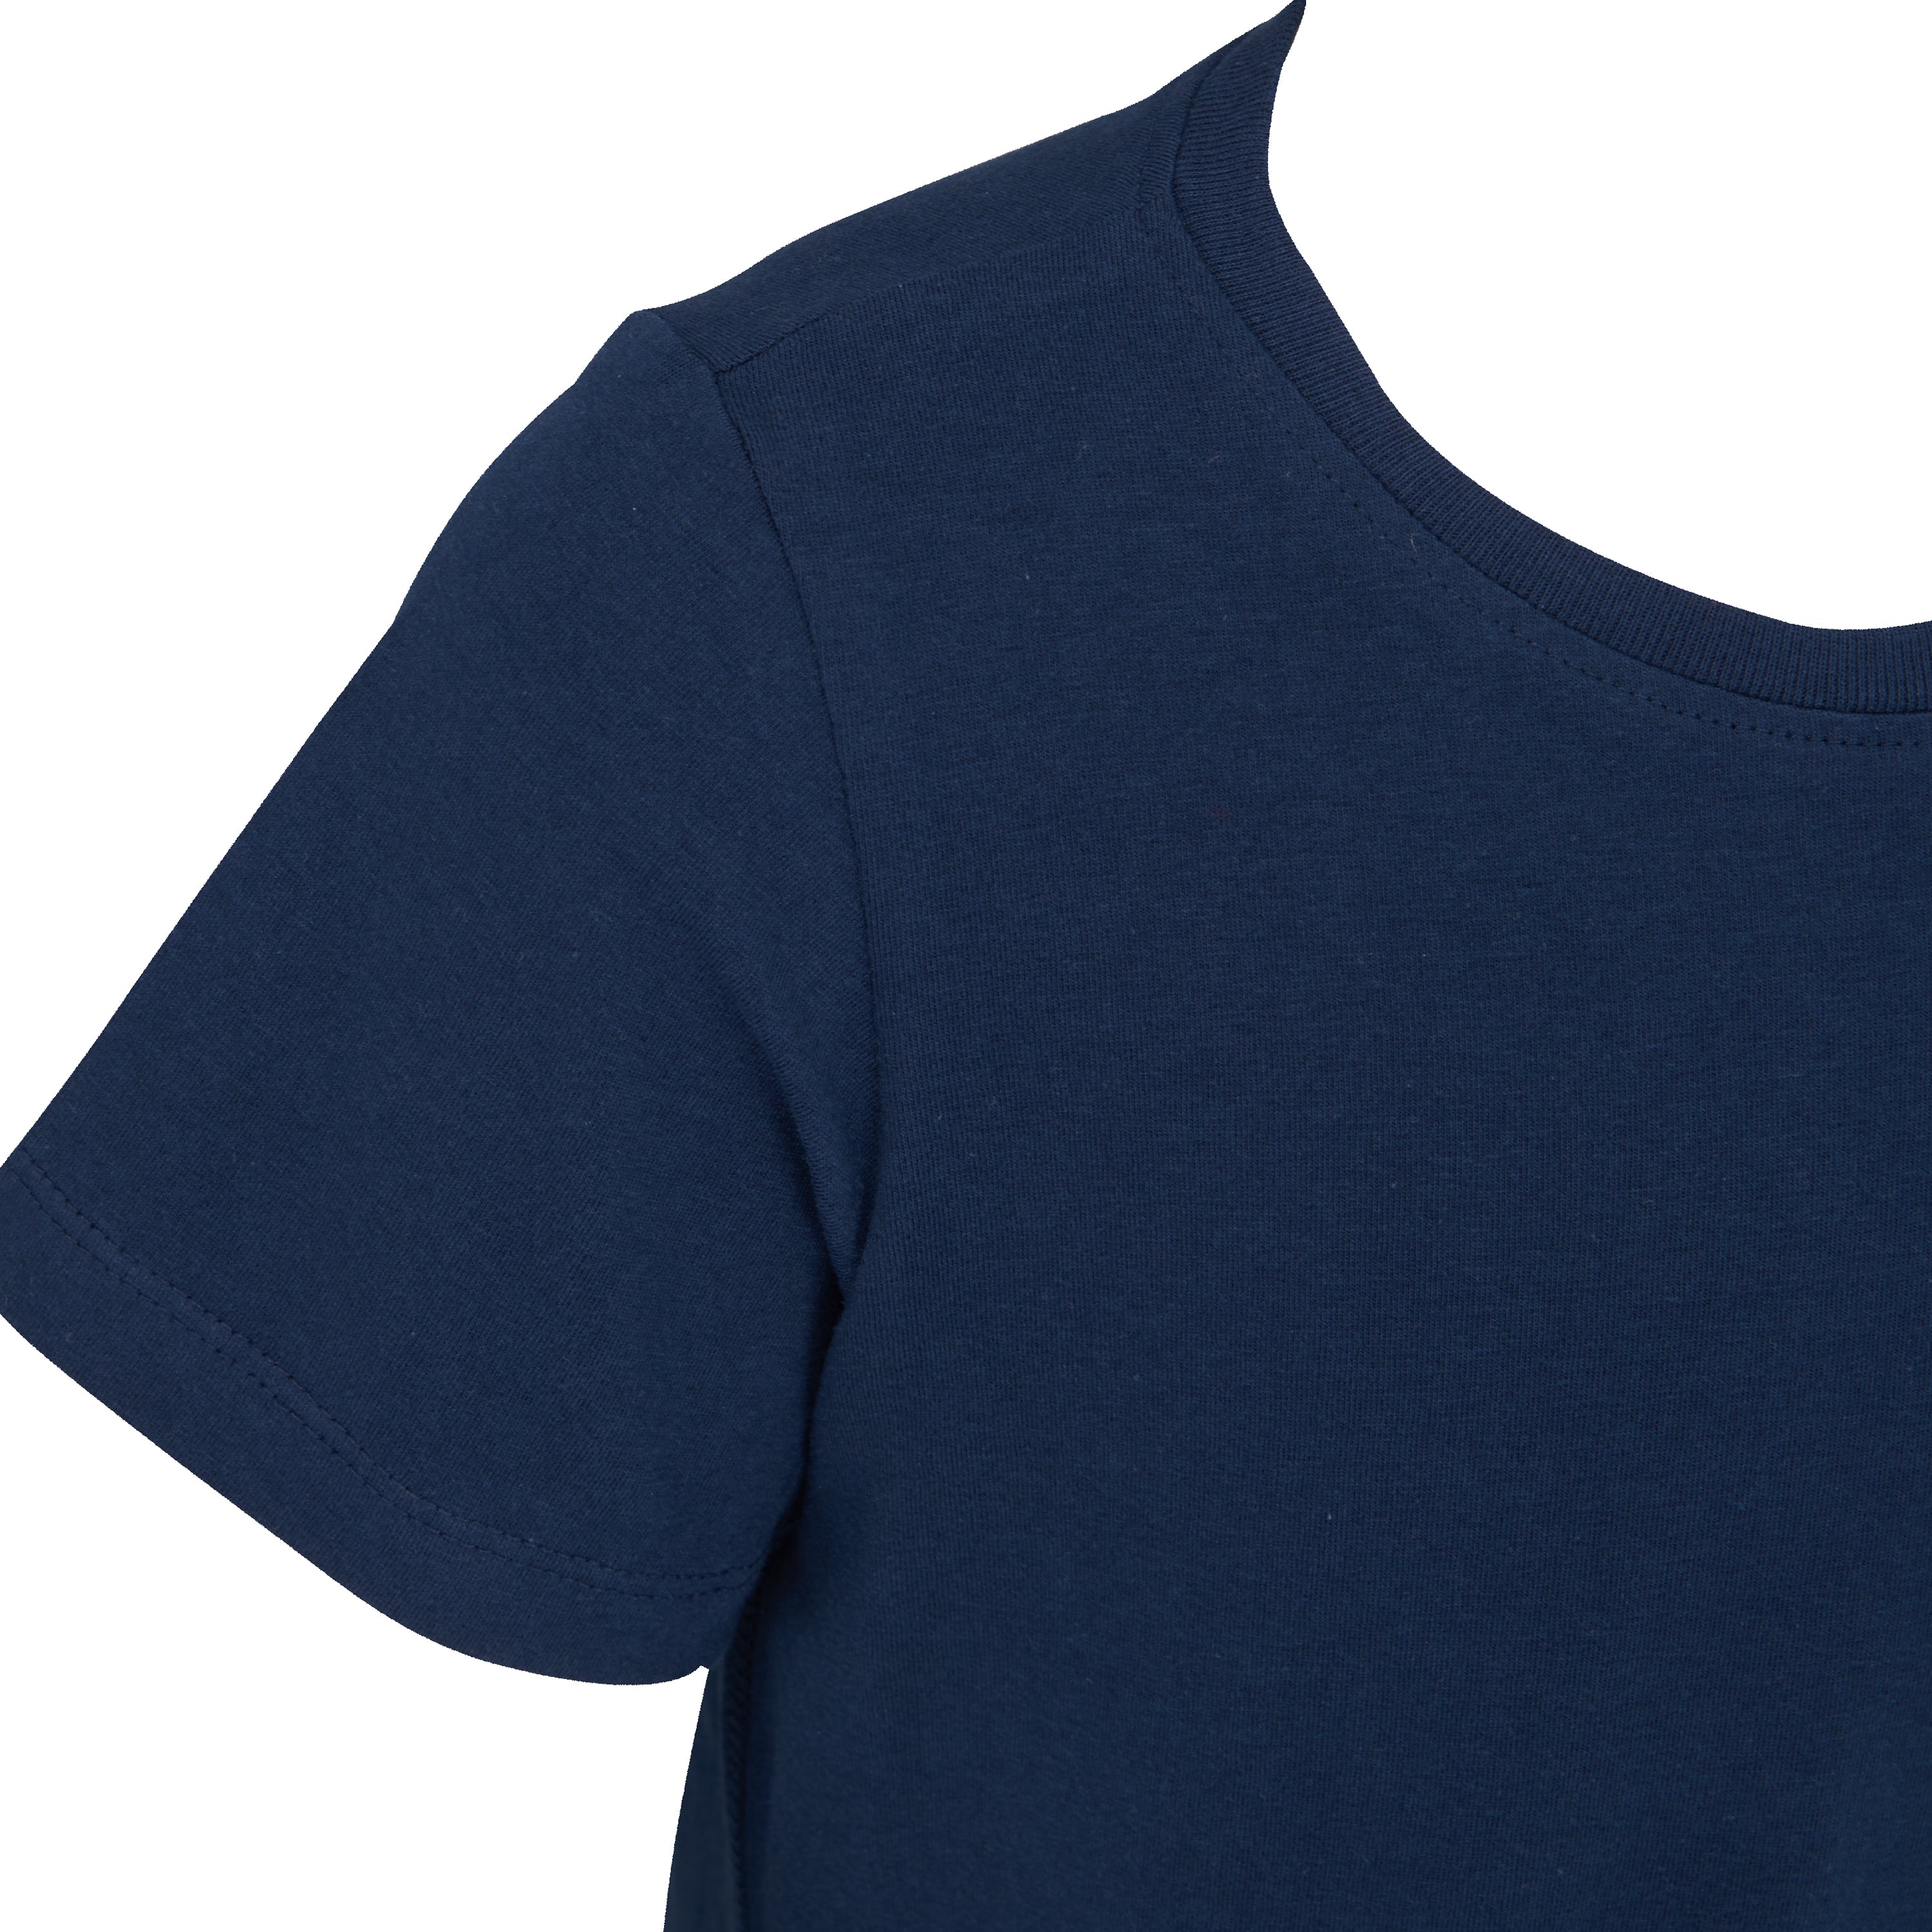 KayCey_Adaptive_clothing_for_older_children_with_special_needs_Short_Sleeve_Navy_shoulder